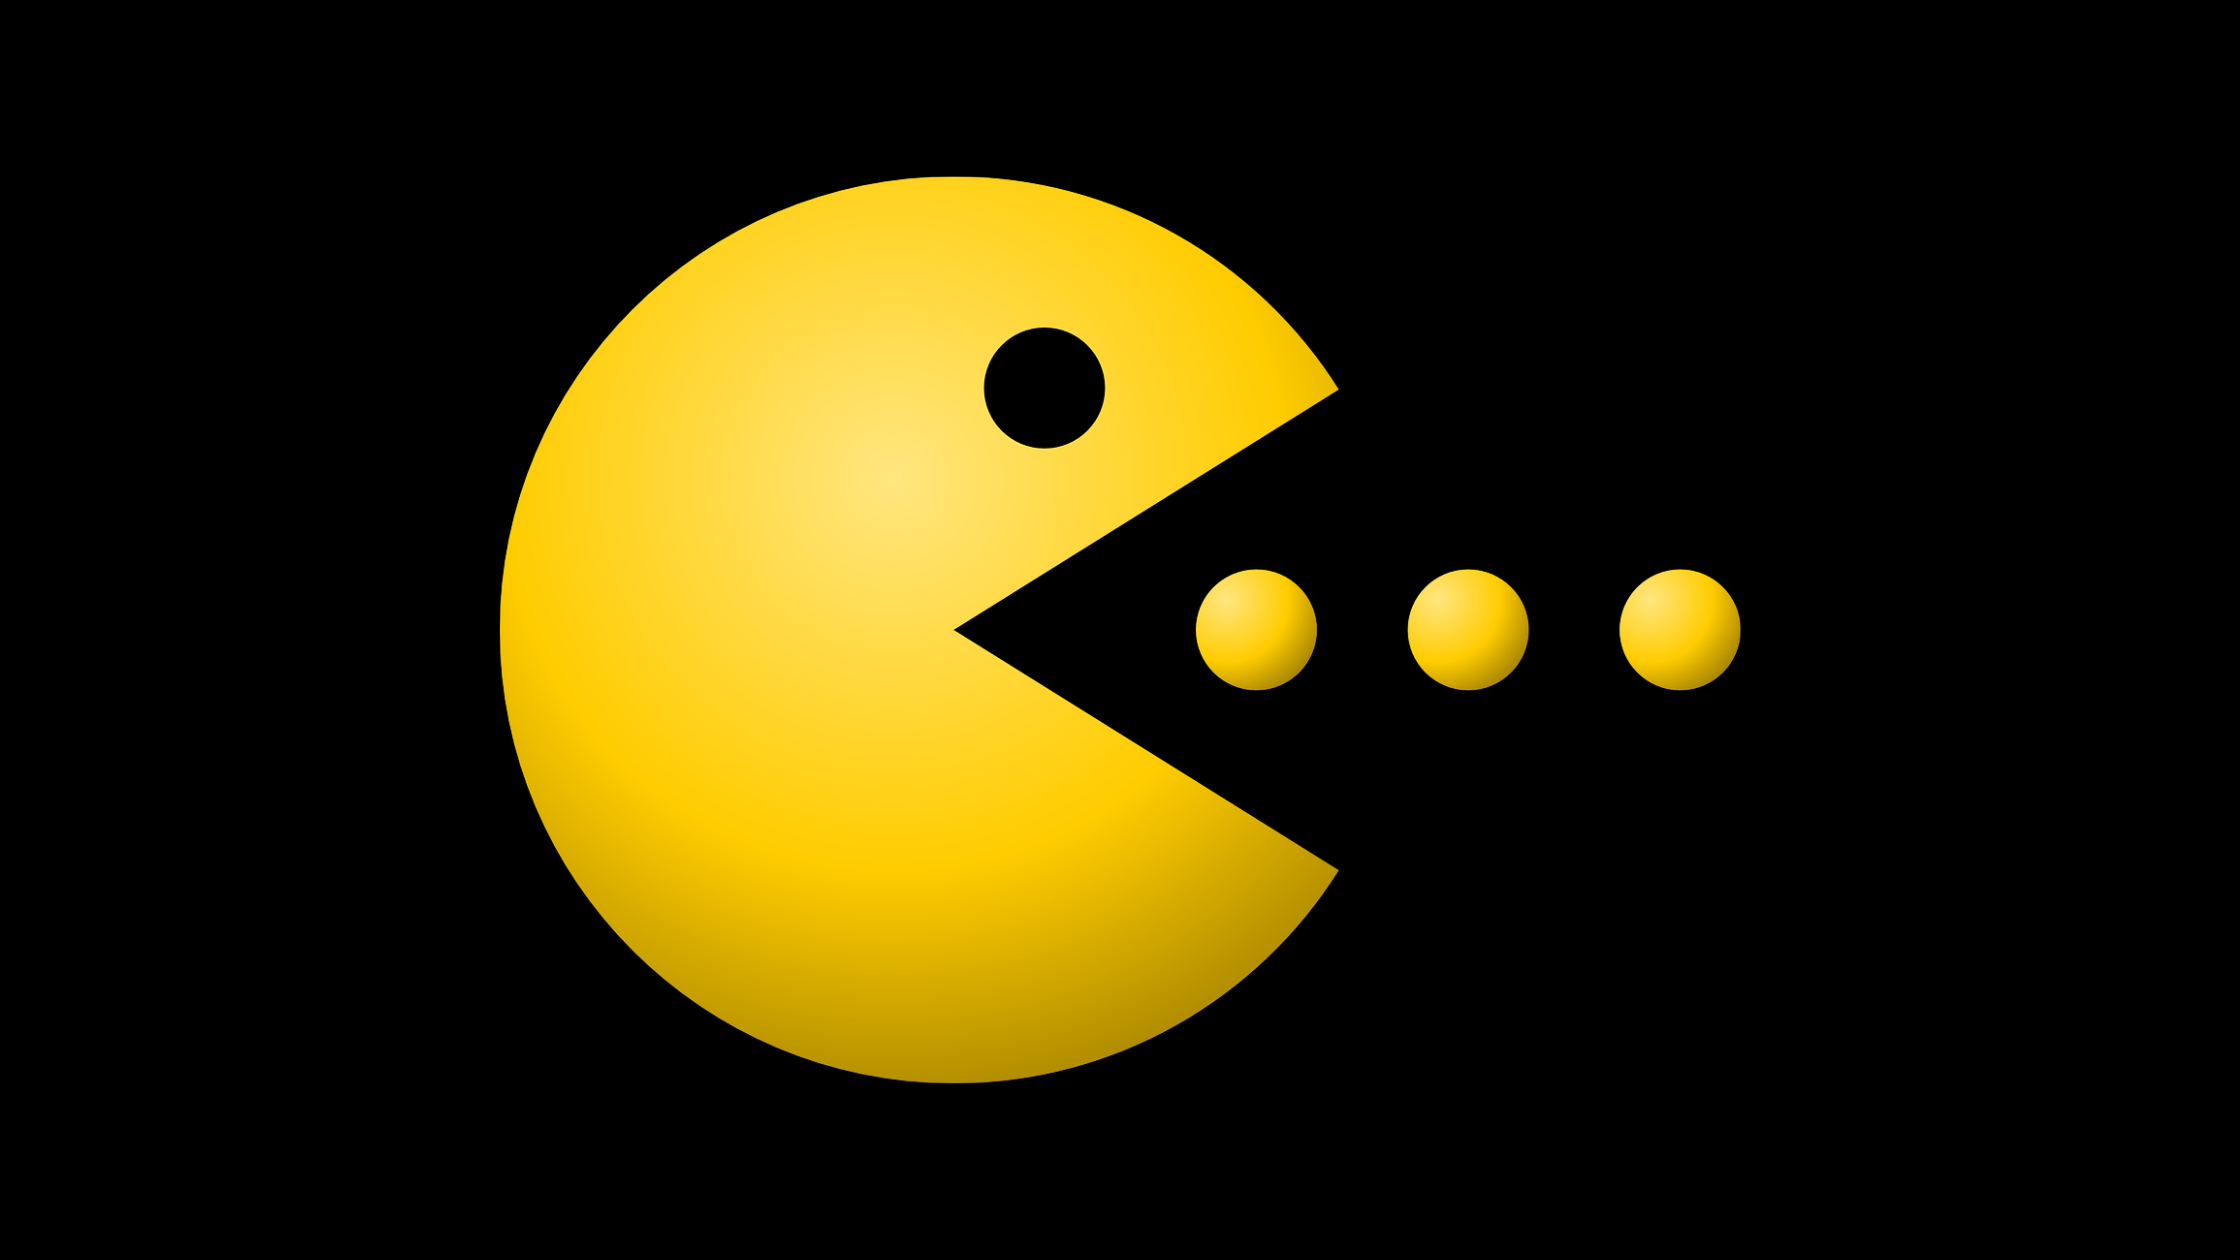 Google's interactive doodle celebrates iconic video game PAC MAN